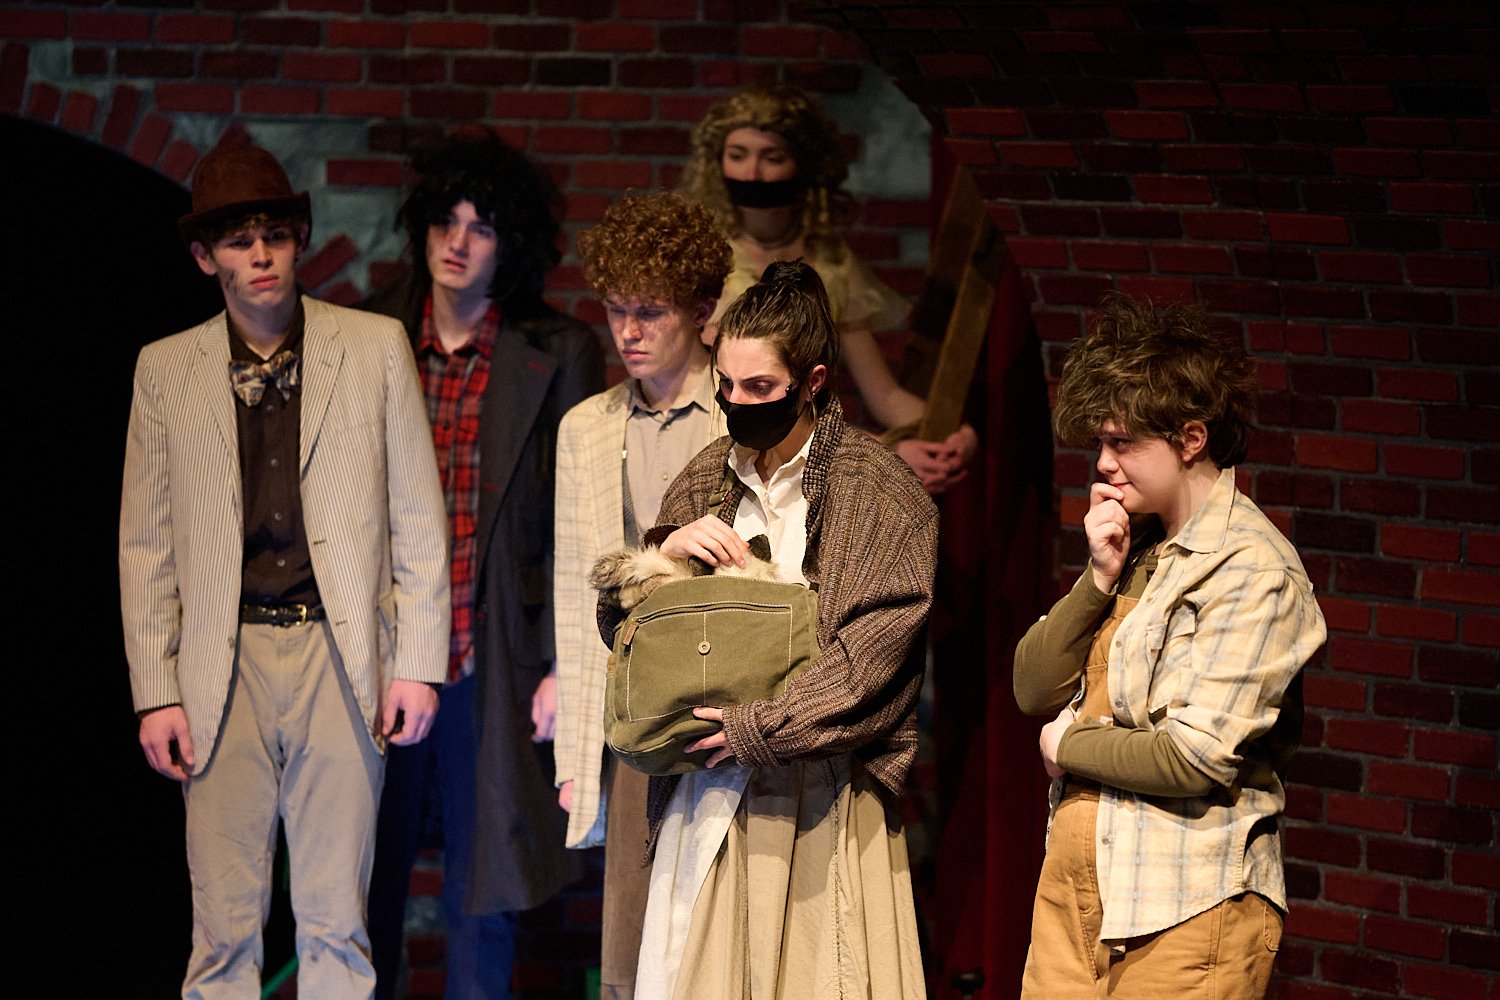  SEWICKLEY, PA, USA - MARCH 2ND 2022: High School students of Sewickley Academy are performing in an annual musical show “Urinetown” running on March 3rd-5th 2022. Kayla Hall 